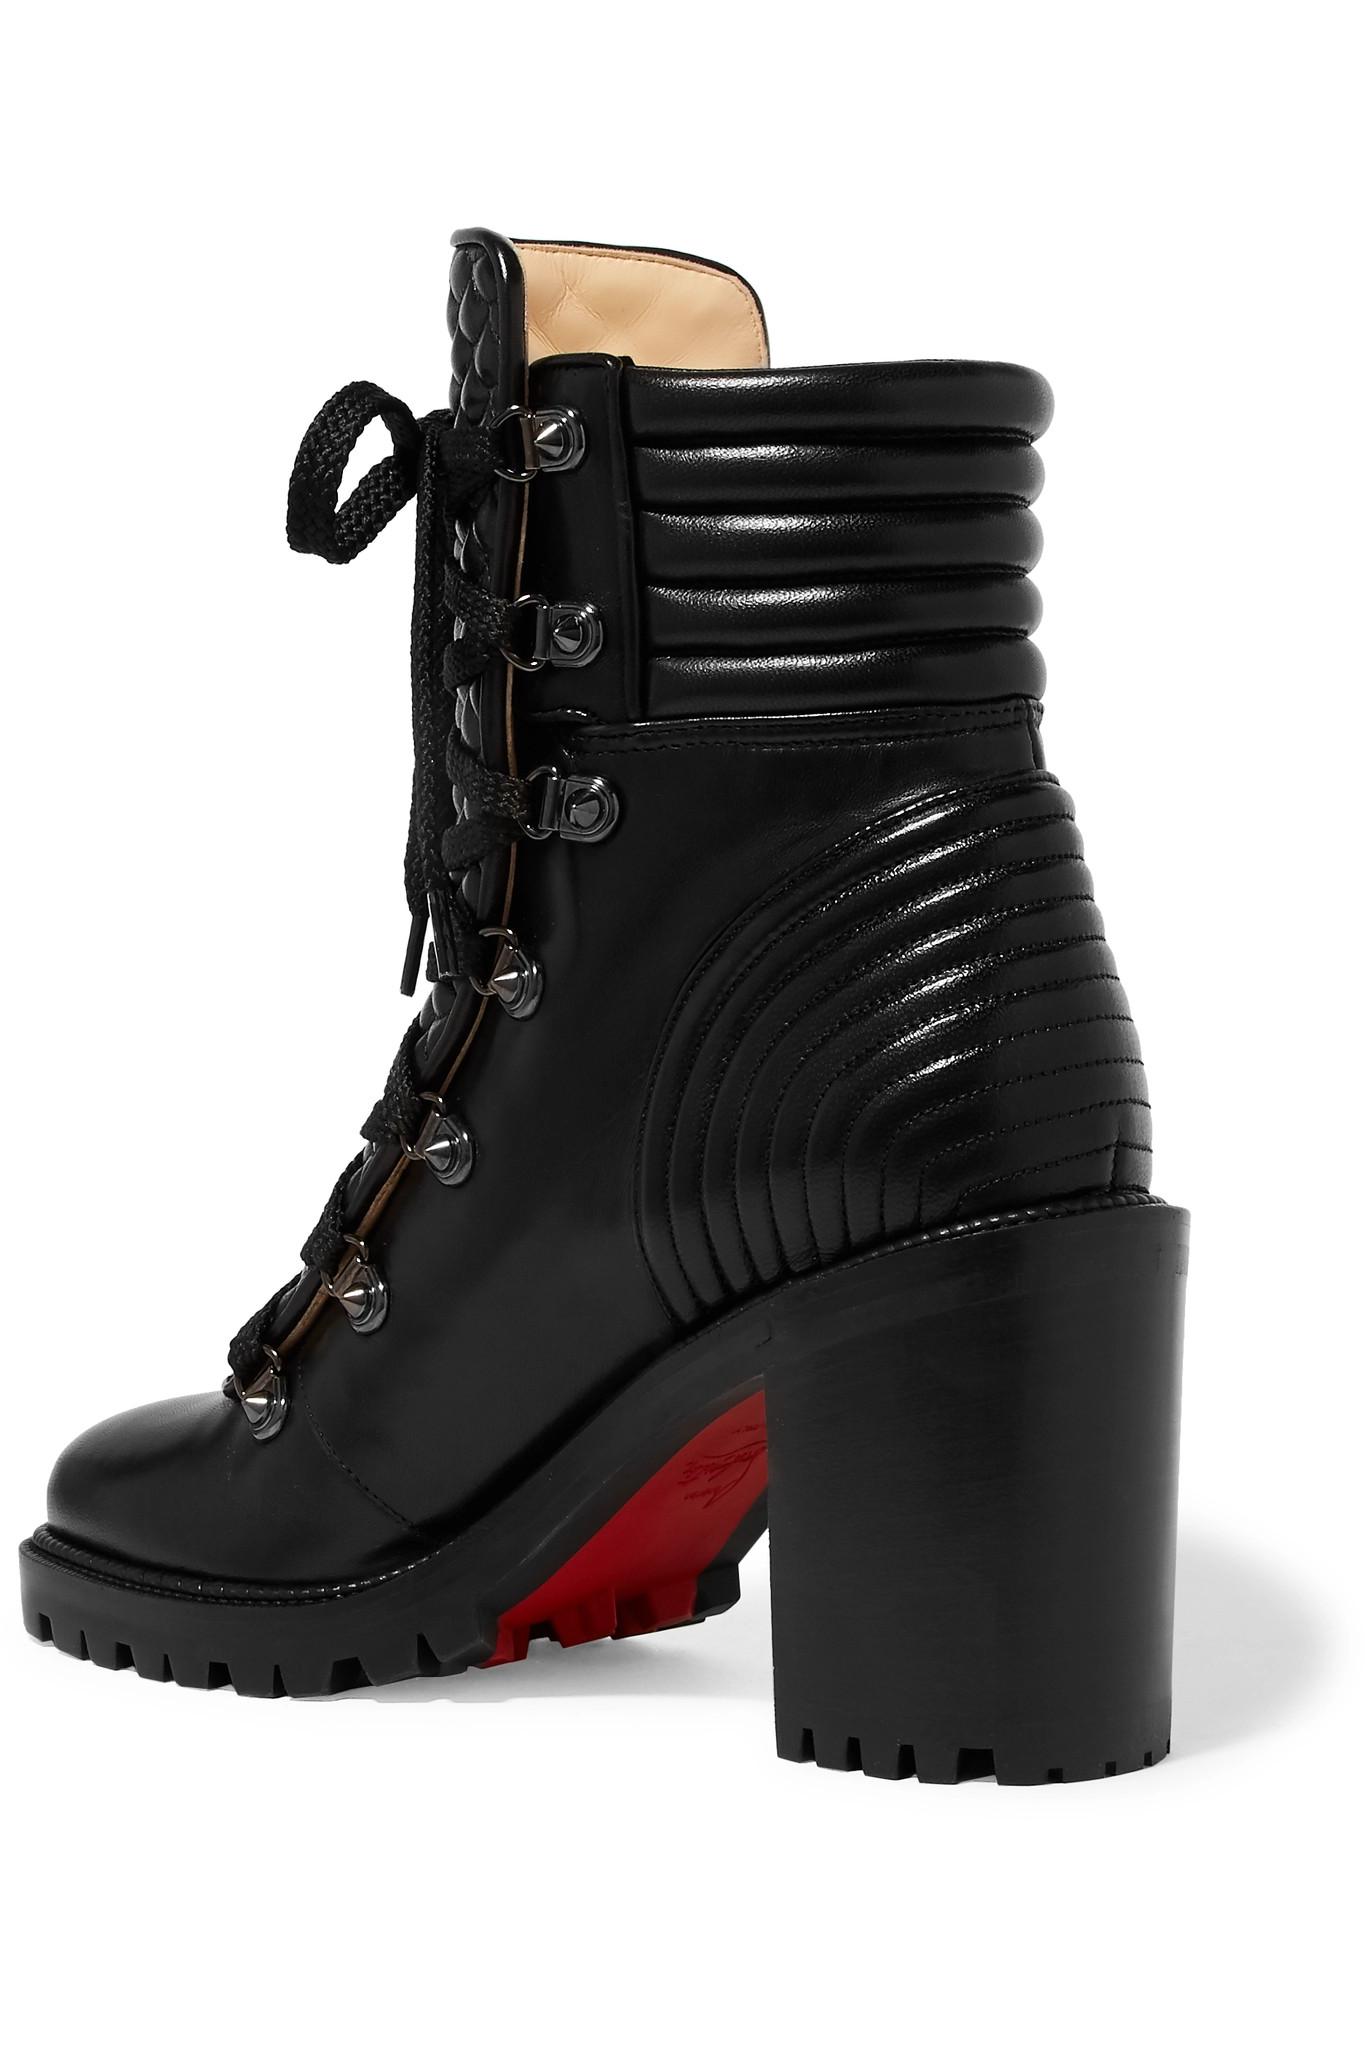 Christian Louboutin Mad 70 Spiked Quilted Leather Ankle Boots in Black - Lyst